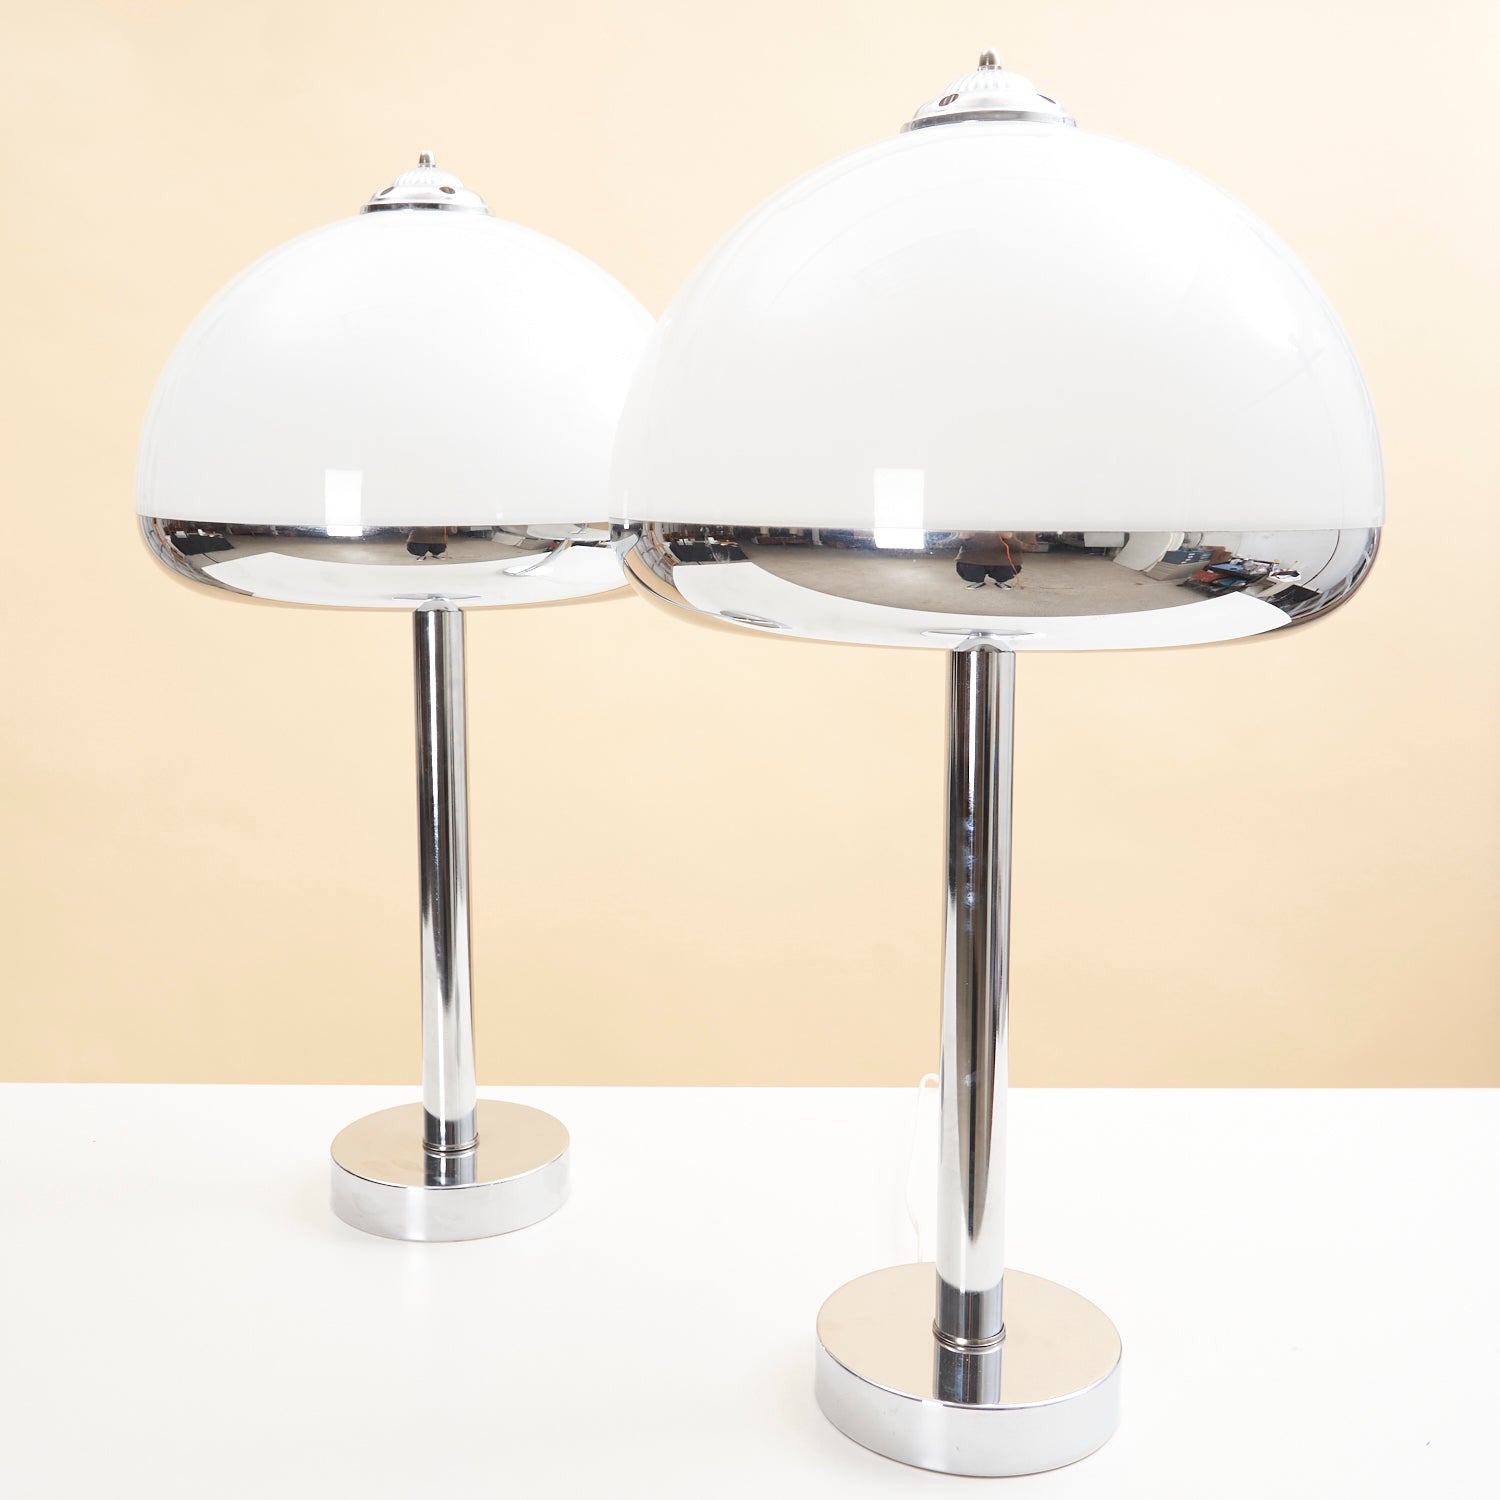 Pair of Vintage Chrome Table Lamps w/ Acrylic Shades